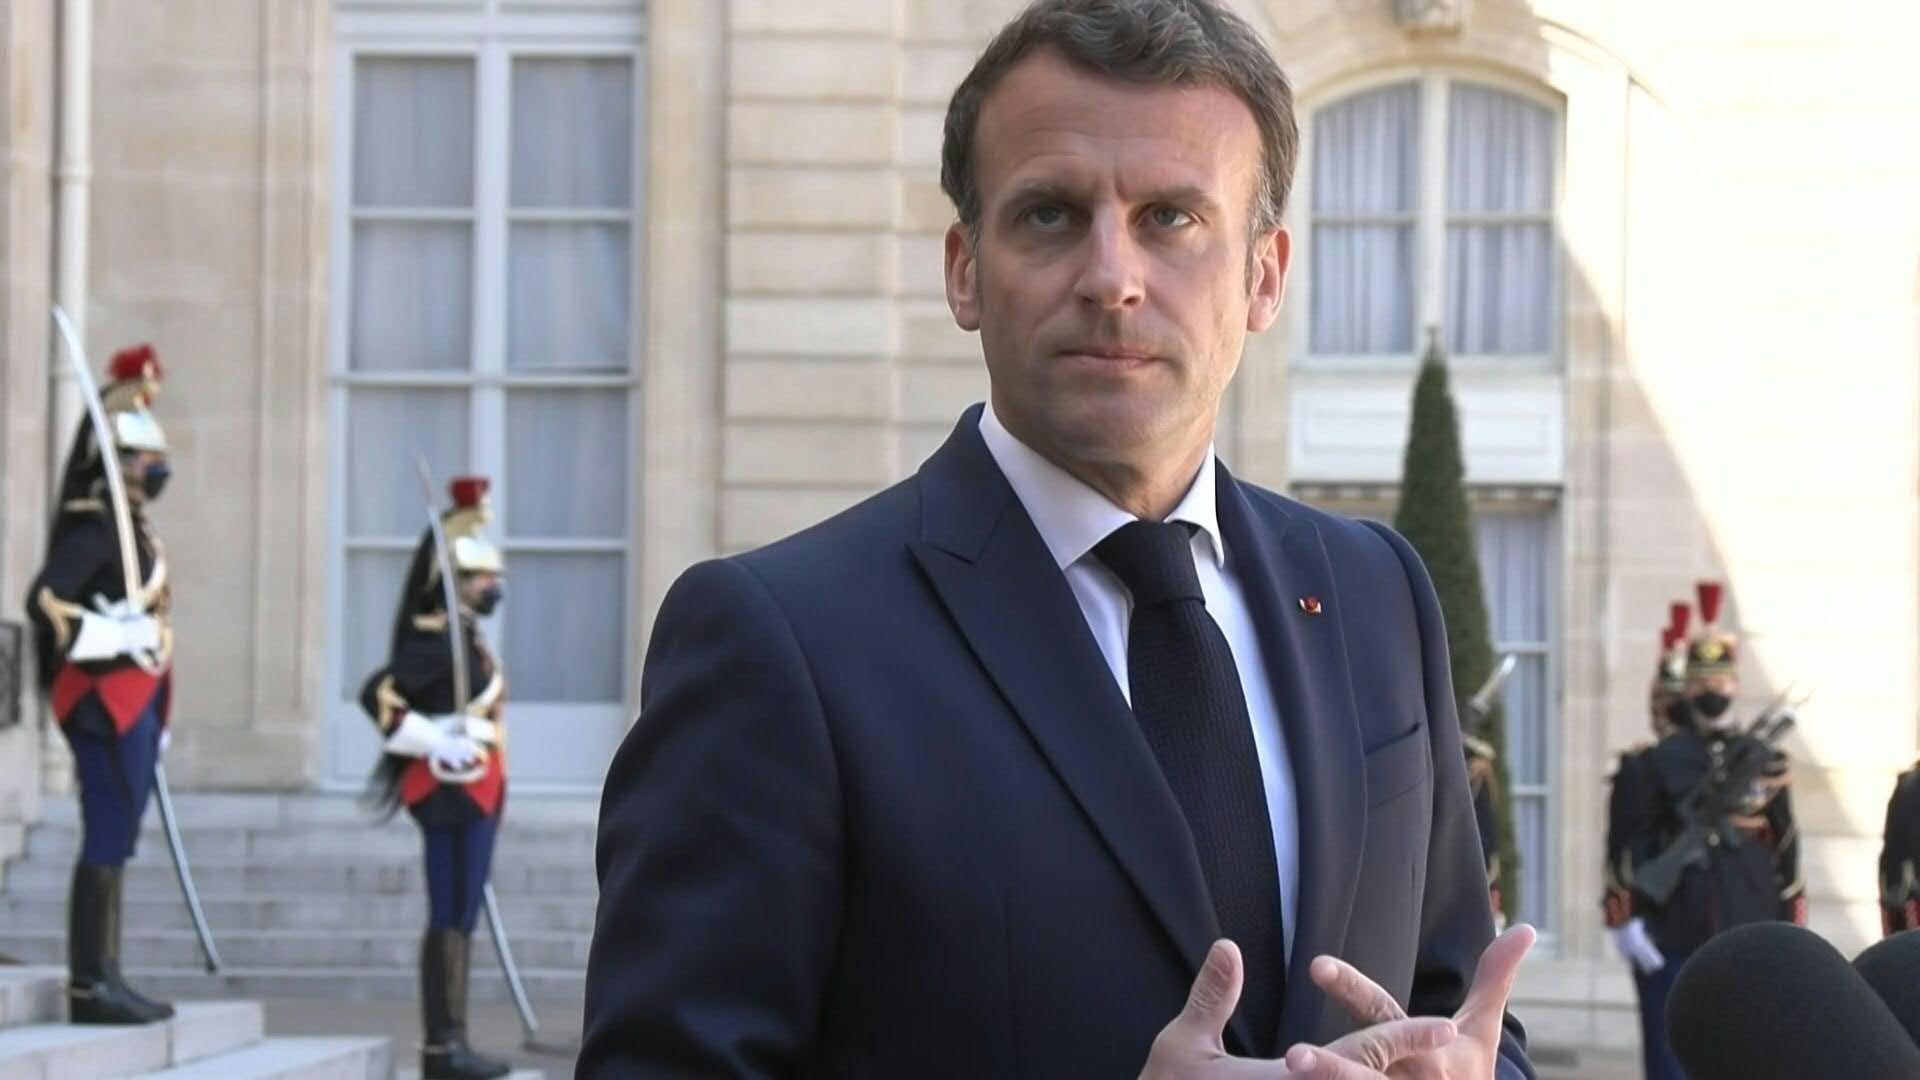 Macron Condemns Chad Violence, Opposes 'Succession Plan'